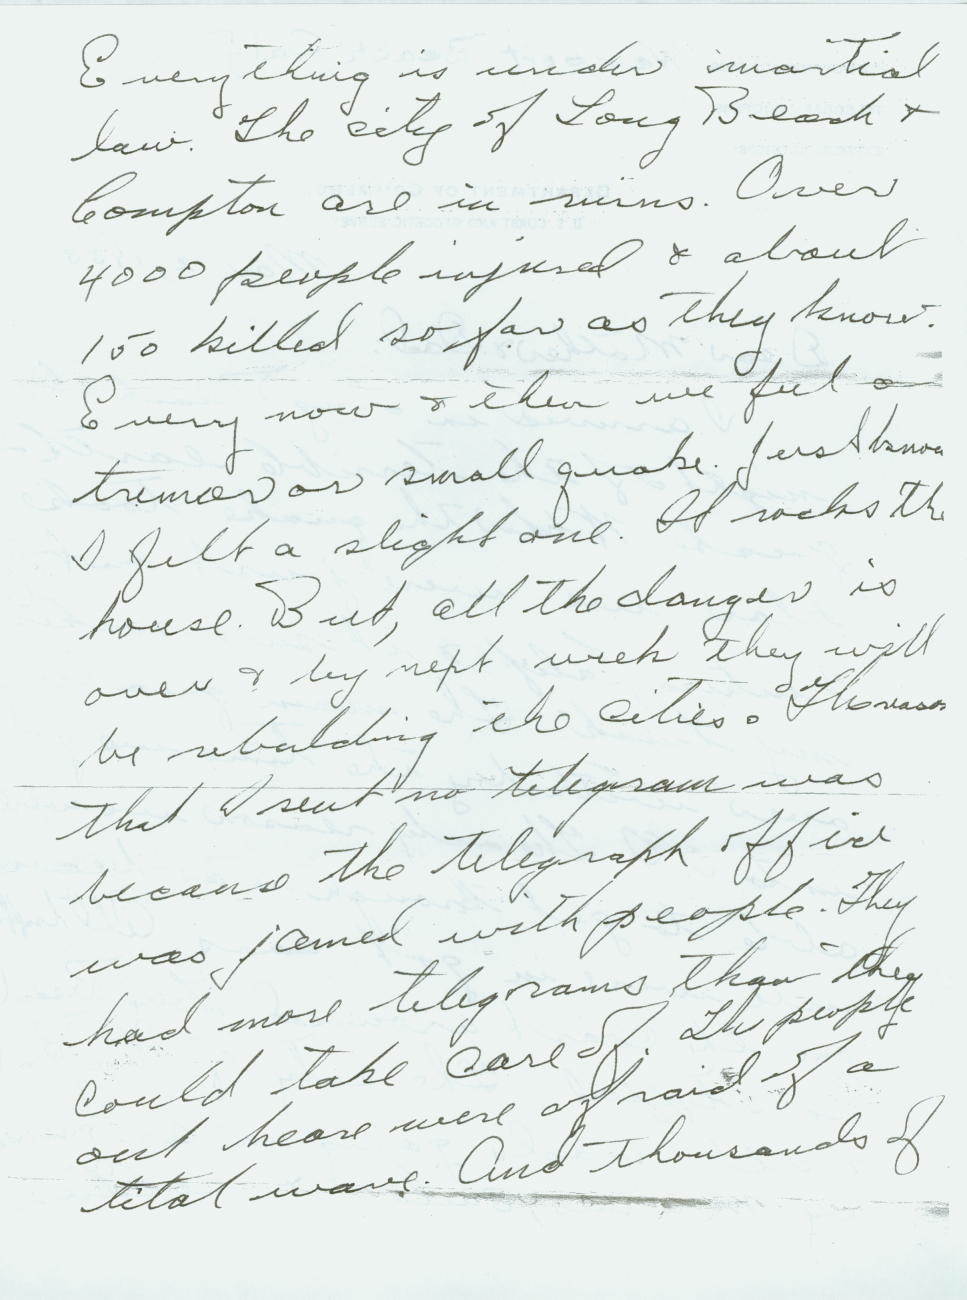 Page 1 of Floyd Risvold's letter home describing the Long Beach earthquakedestruction that he witnessed on March 11, 1933